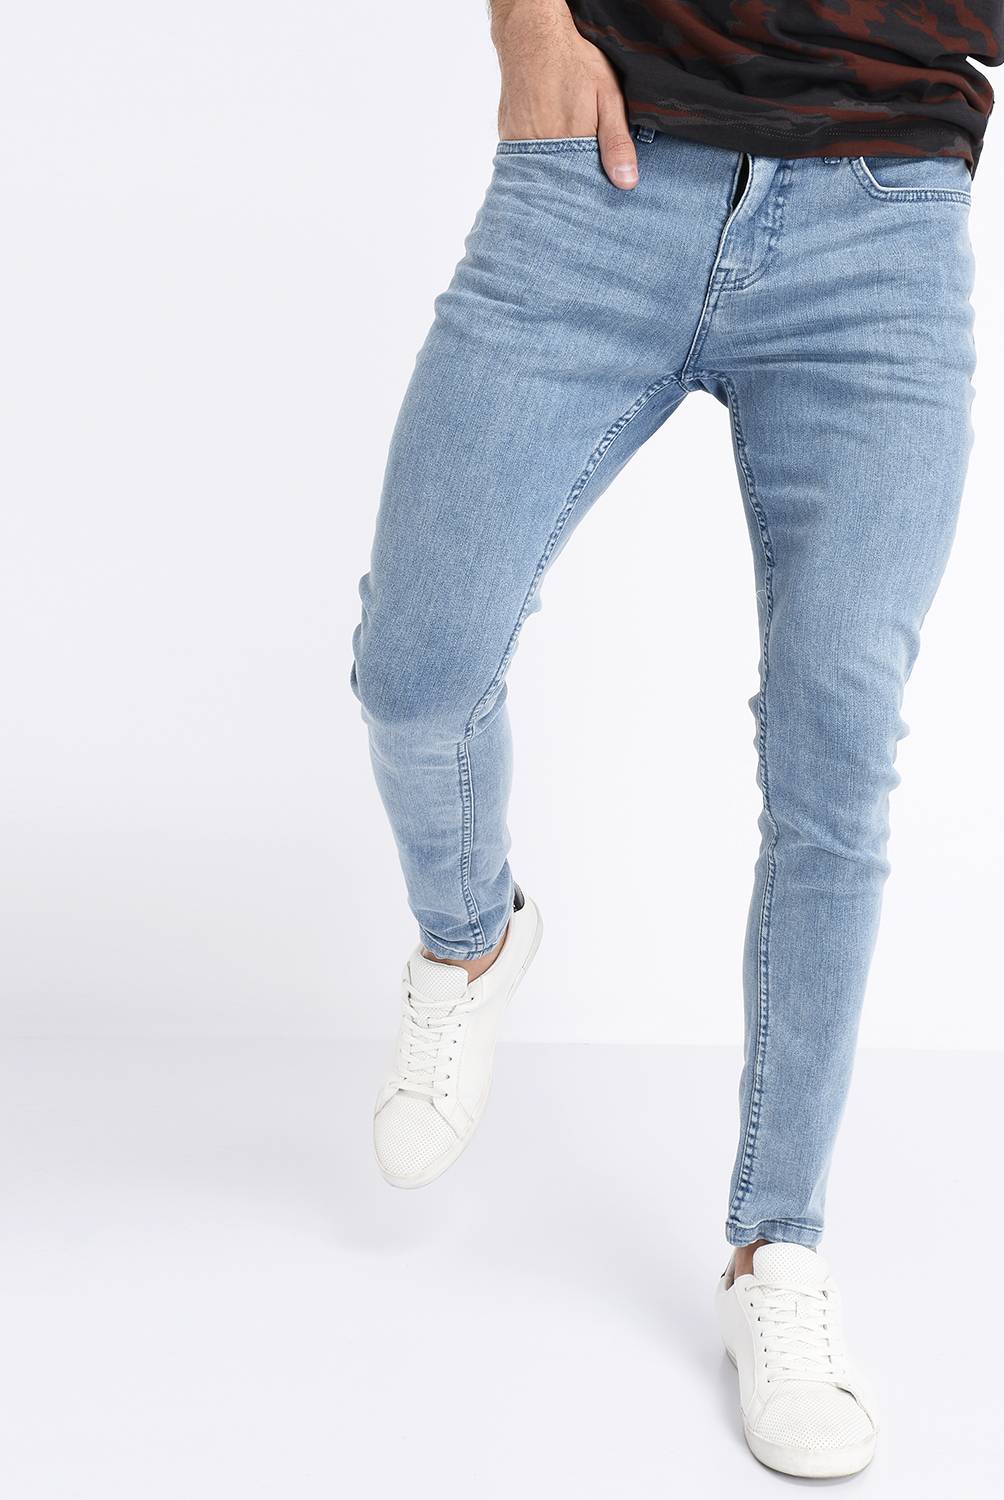 MOSSIMO - Jeans 